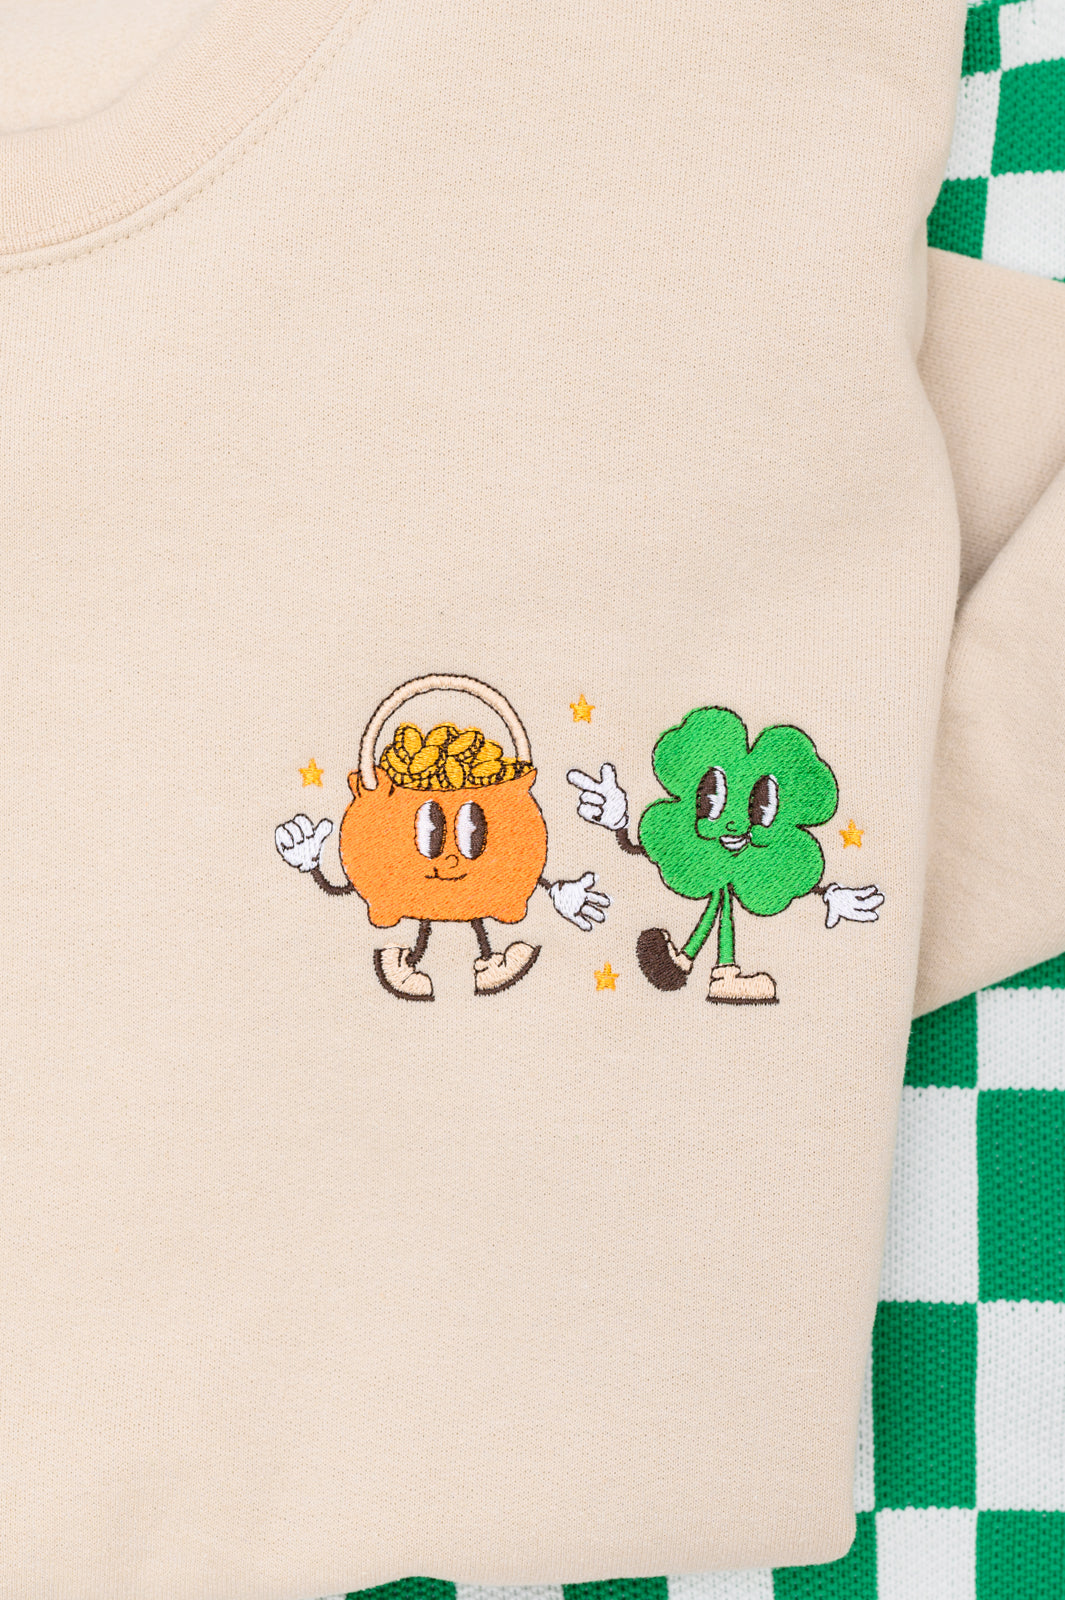 PREORDER: Pot of Gold Embroidered Sweatshirt